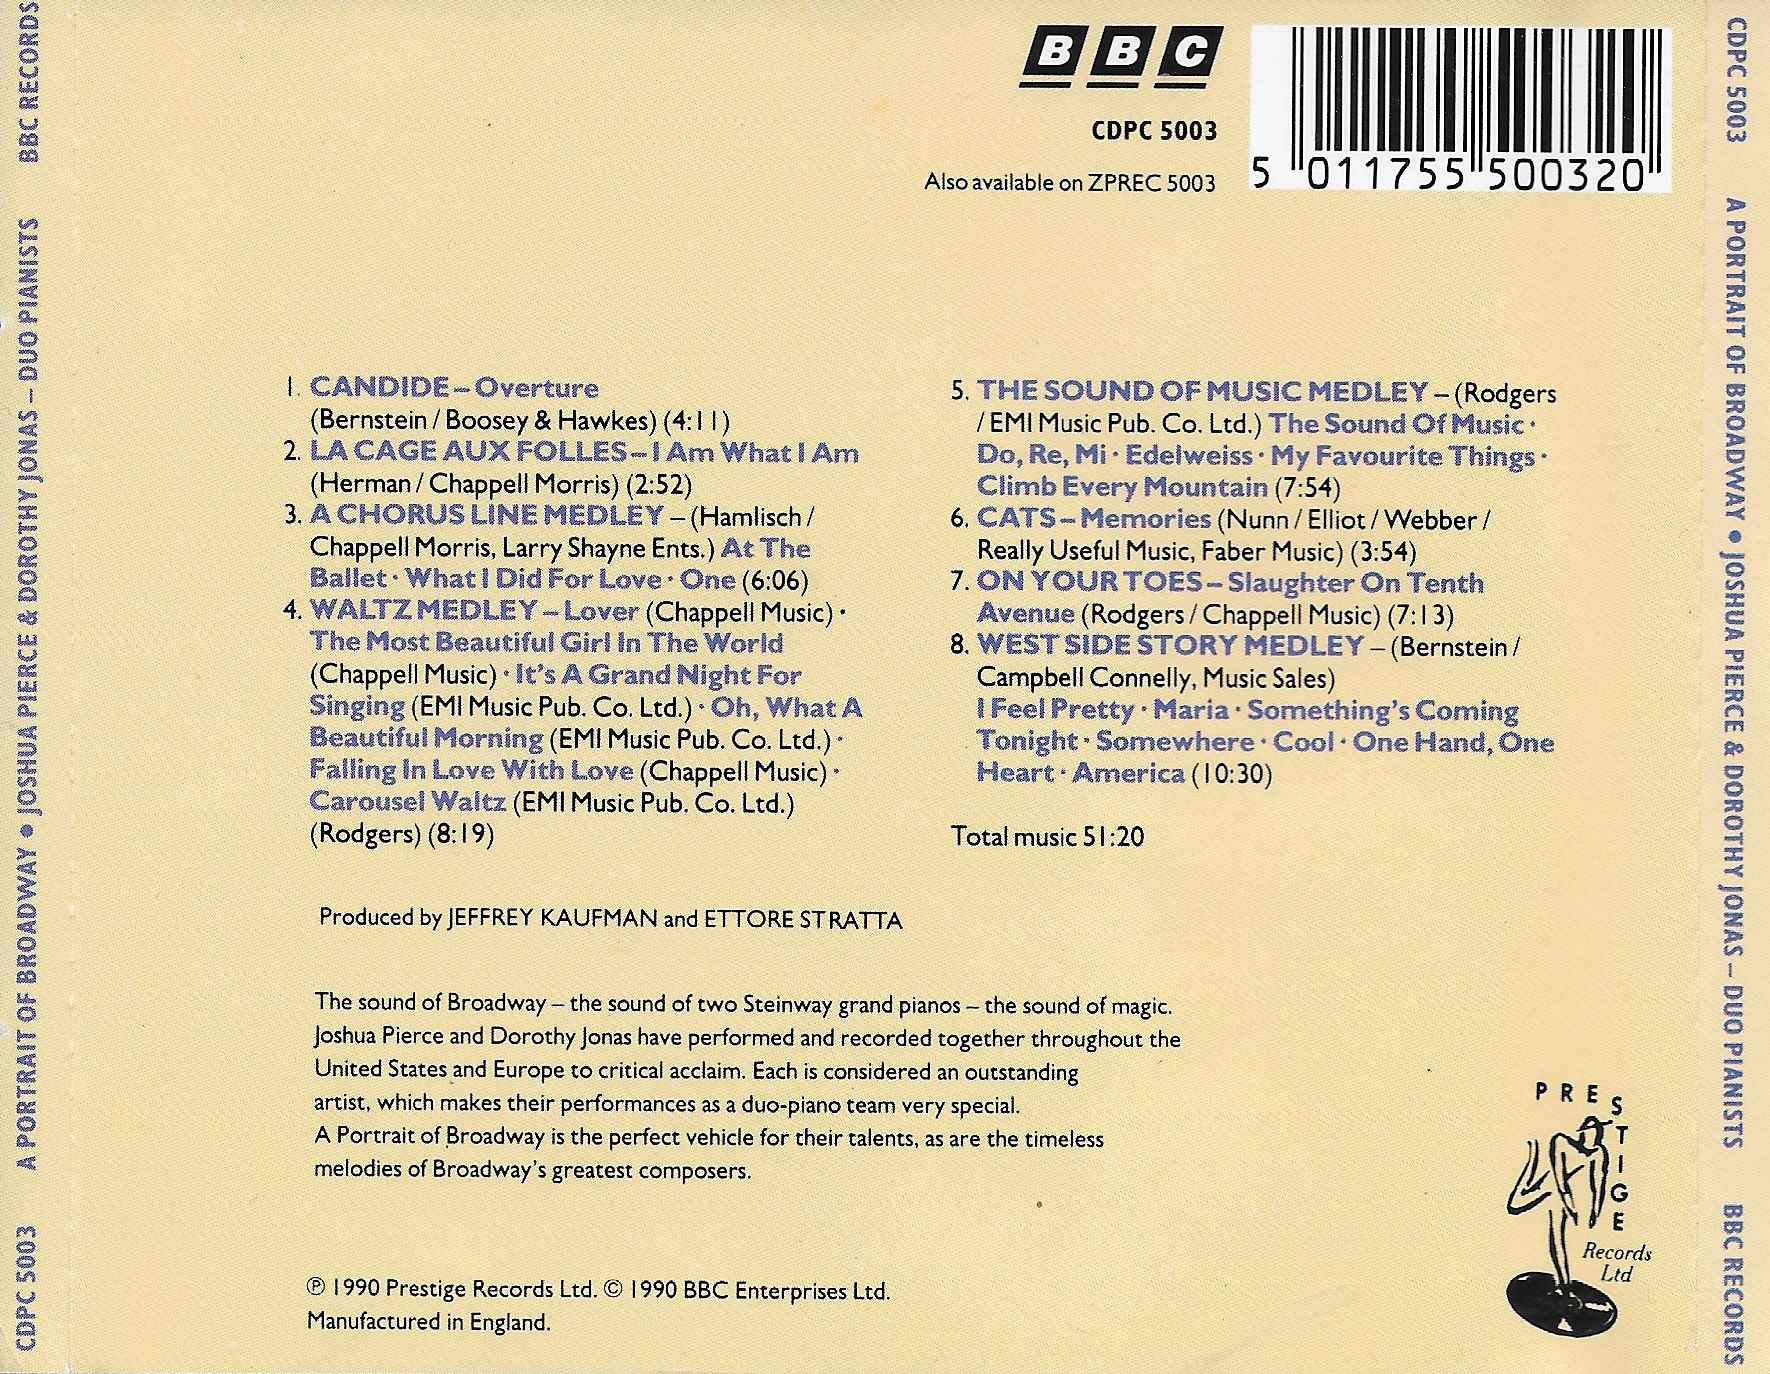 Back cover of CDPC 5003